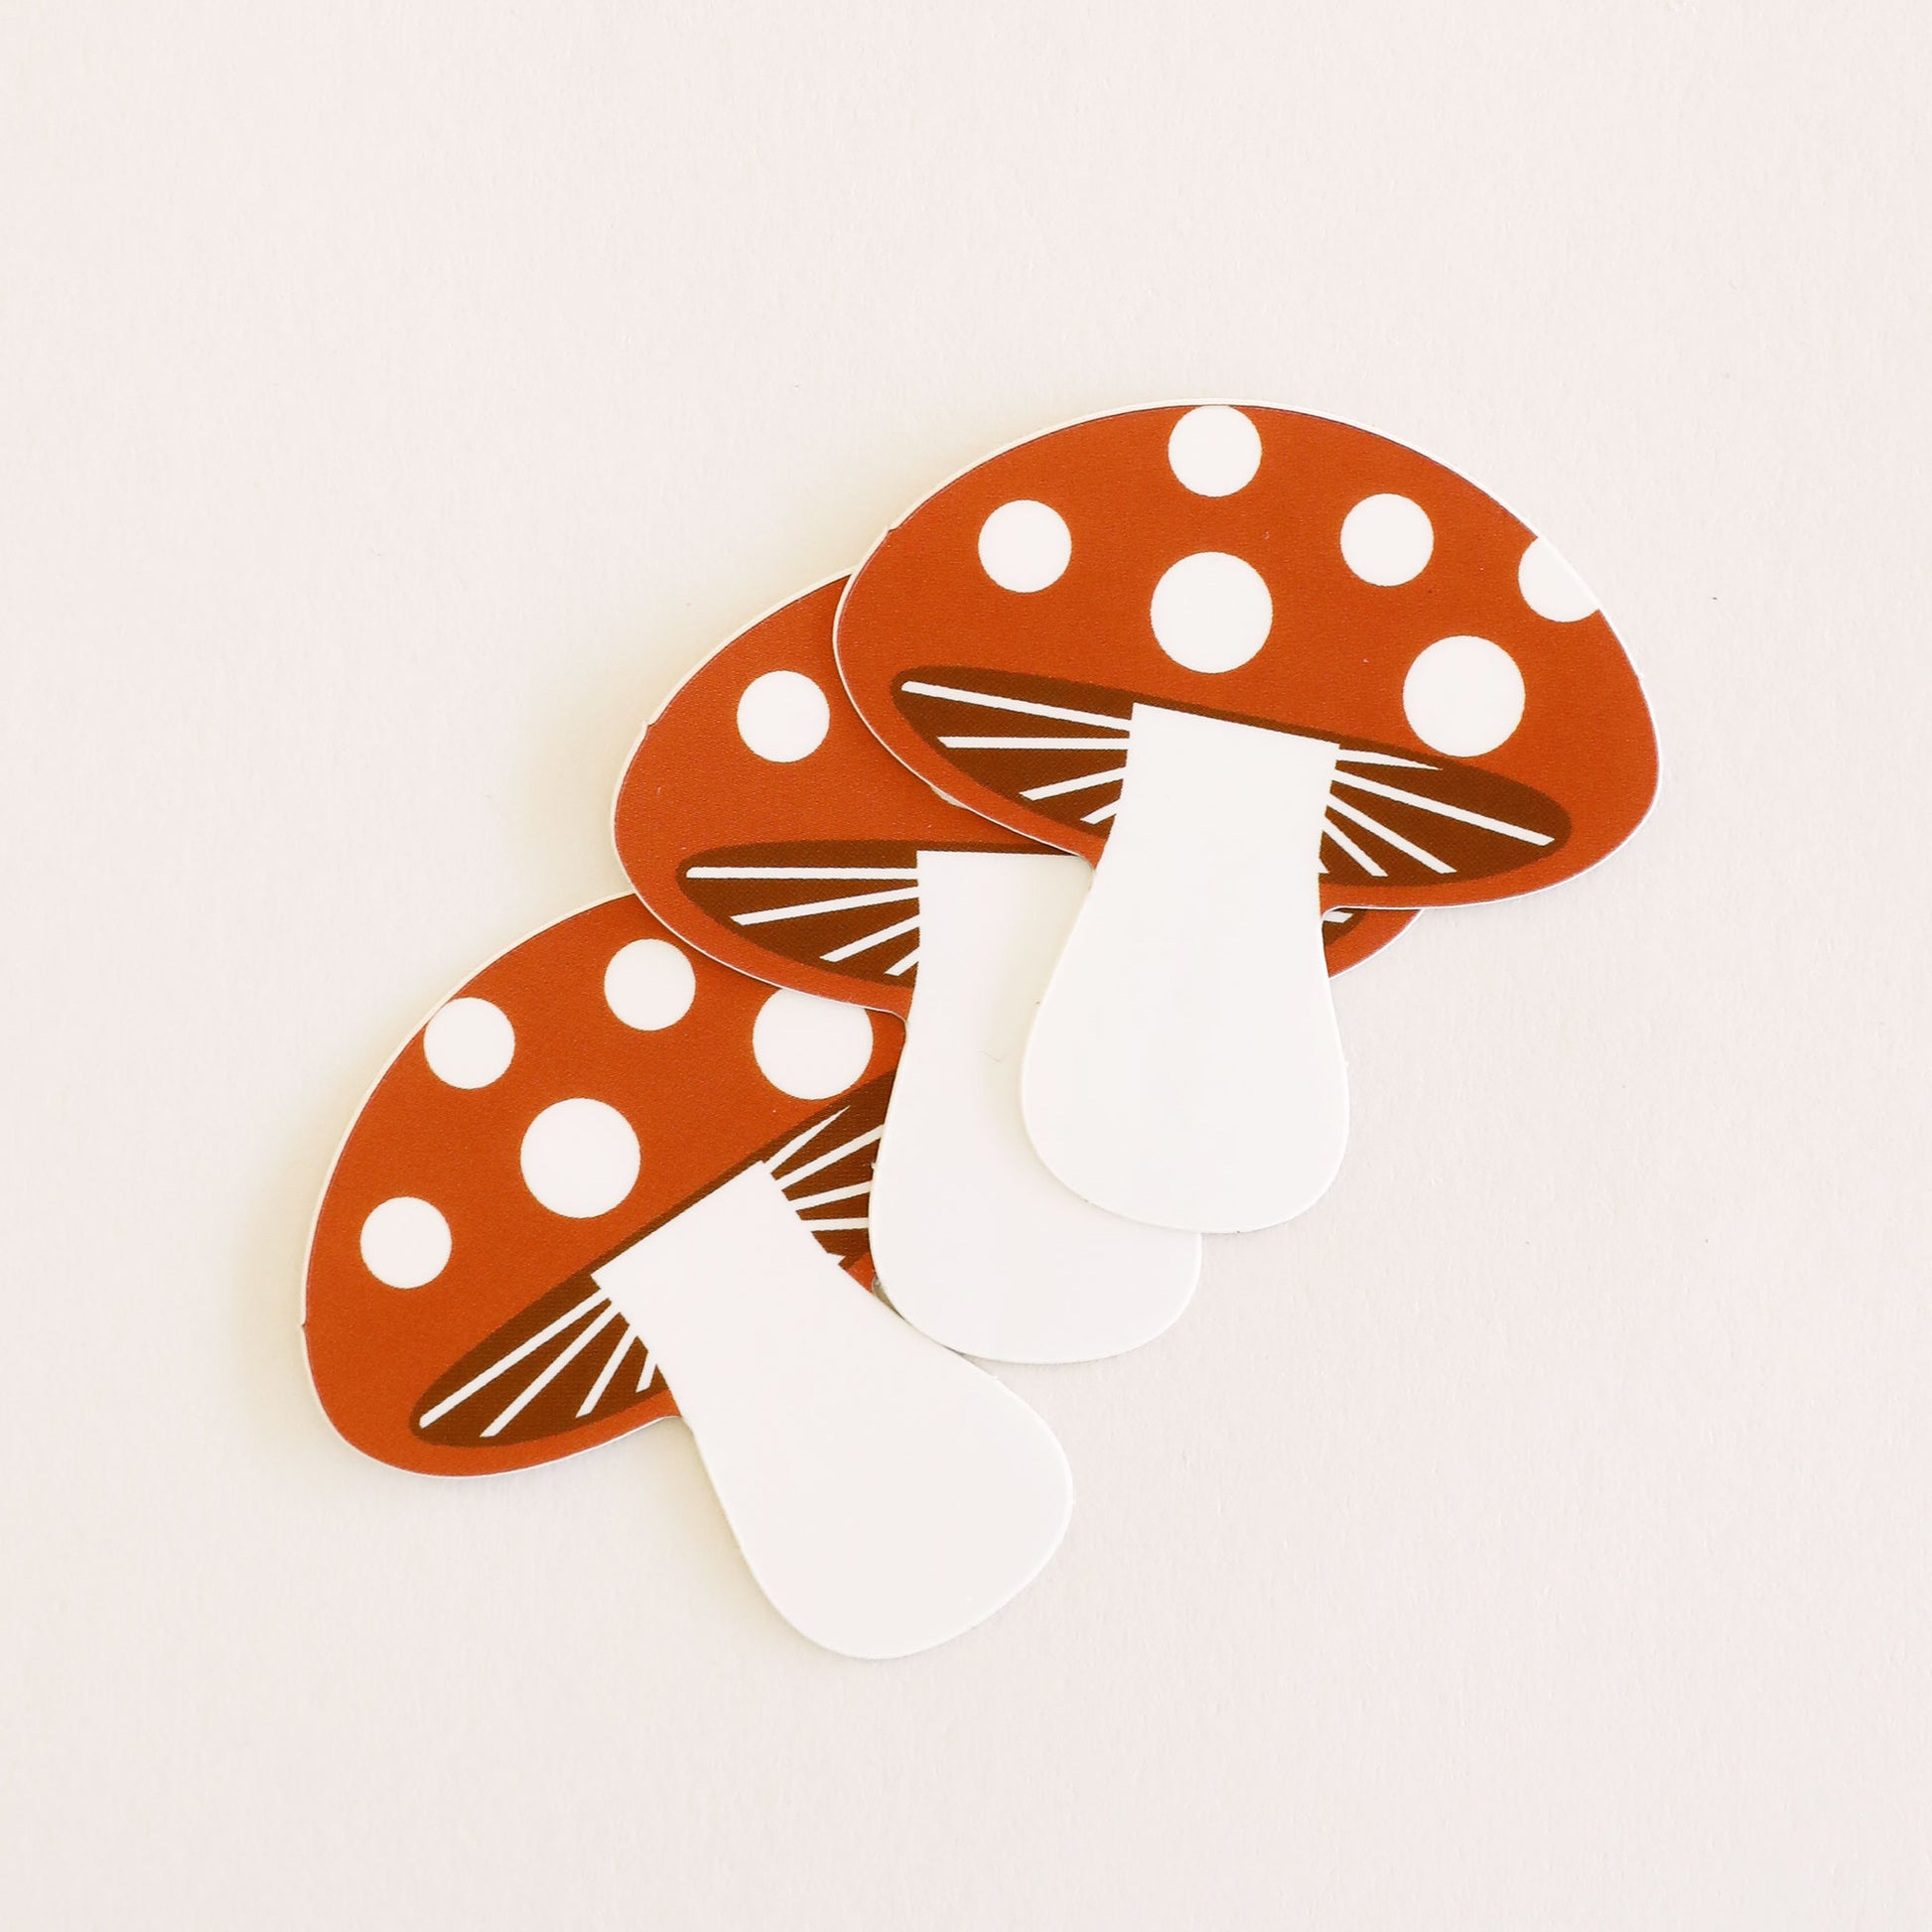 Three classic mushroom stickers with curved red tops with white polk-a-dots and white stems.